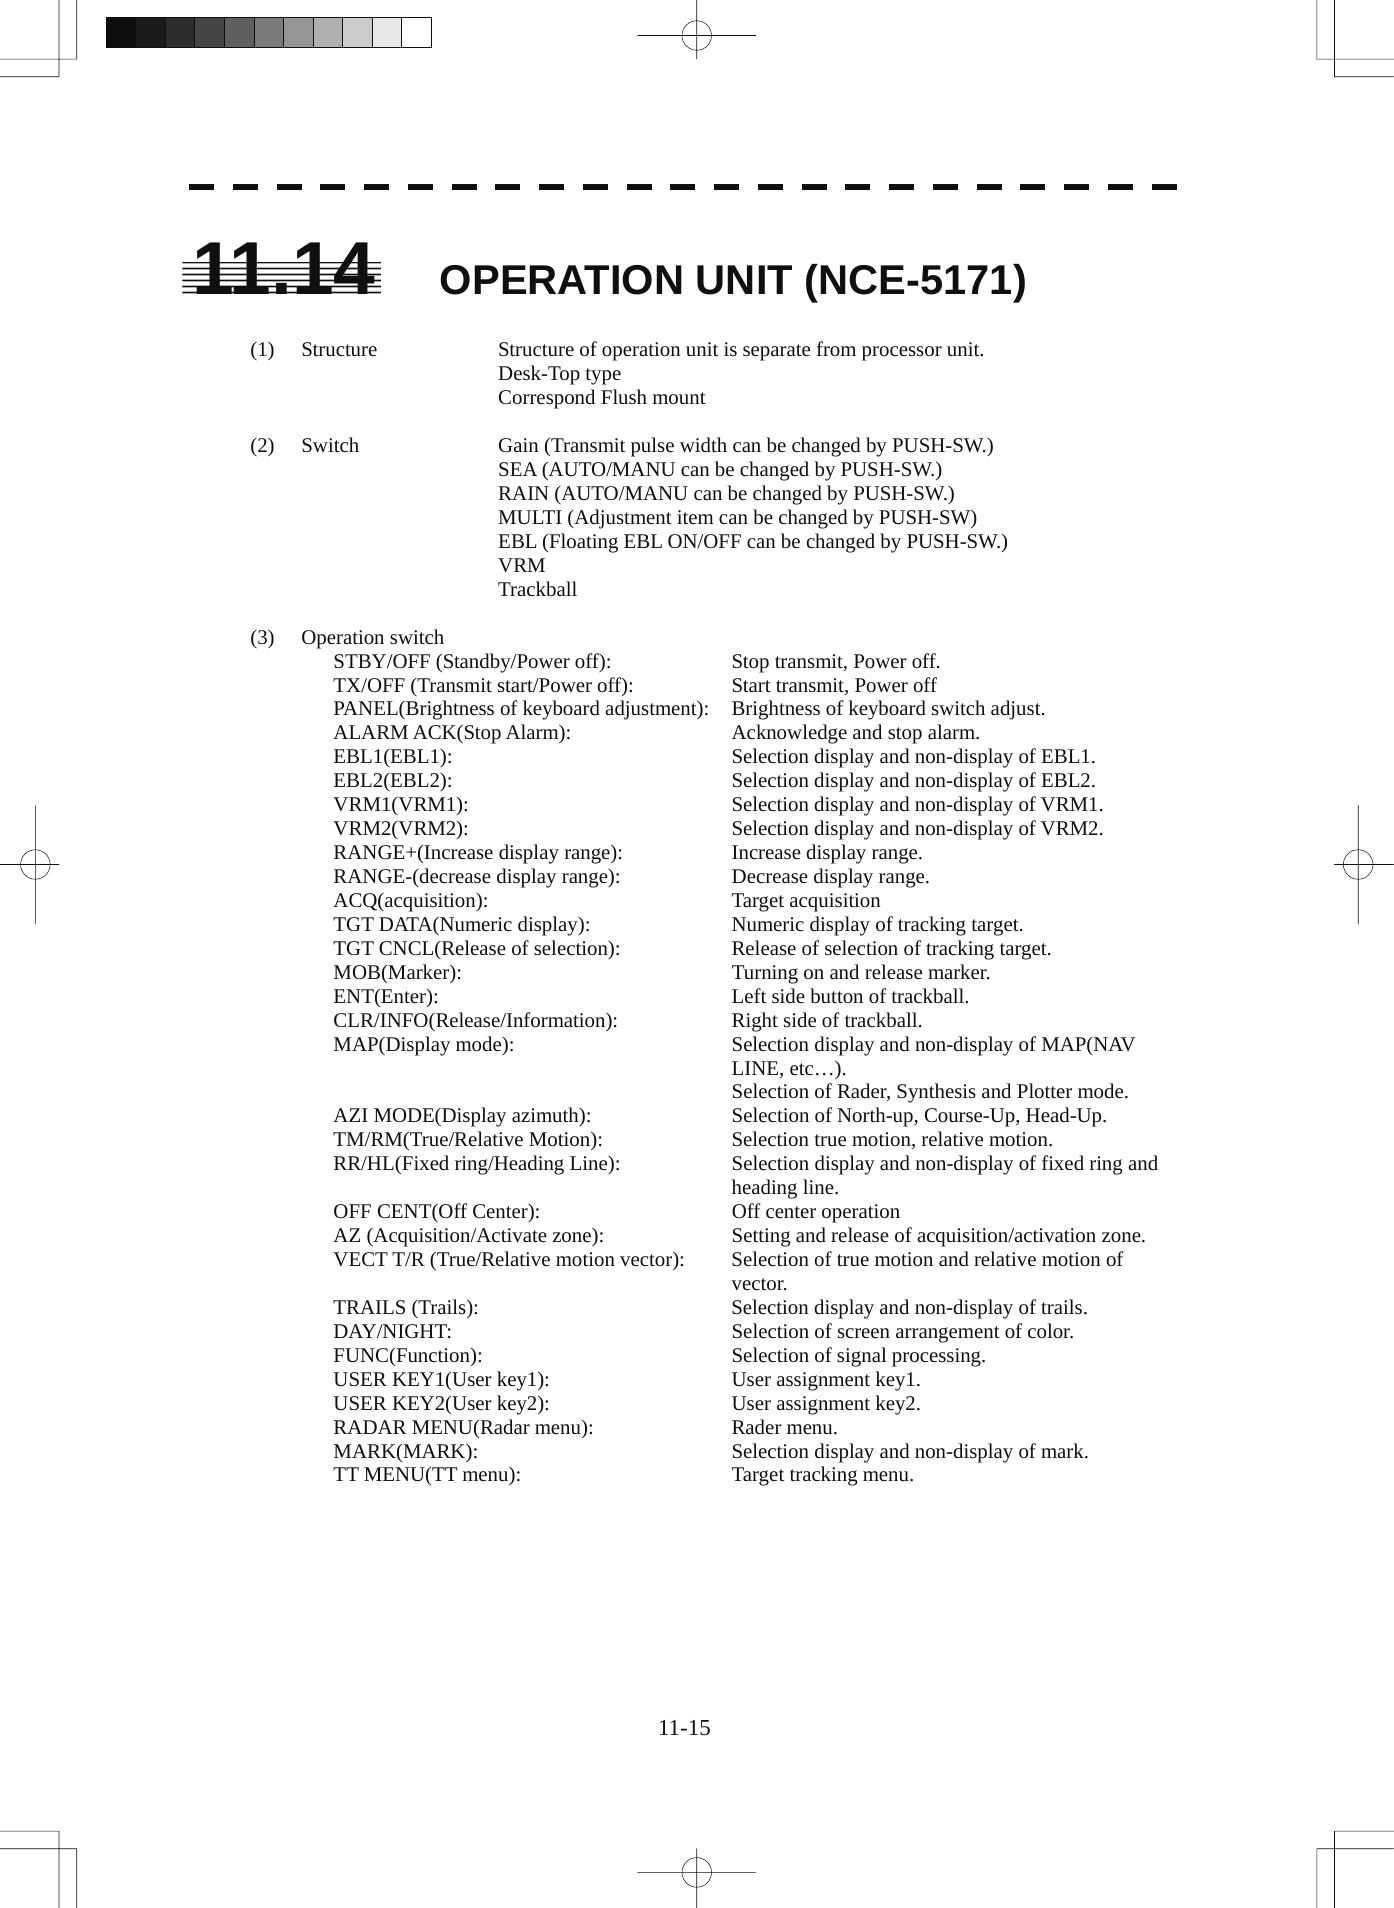  11.14 OPERATION UNIT (NCE-5171)  (1)  Structure  Structure of operation unit is separate from processor unit.    Desk-Top type     Correspond Flush mount  (2)  Switch  Gain (Transmit pulse width can be changed by PUSH-SW.)     SEA (AUTO/MANU can be changed by PUSH-SW.)     RAIN (AUTO/MANU can be changed by PUSH-SW.)     MULTI (Adjustment item can be changed by PUSH-SW)     EBL (Floating EBL ON/OFF can be changed by PUSH-SW.)    VRM    Trackball  (3) Operation switch STBY/OFF (Standby/Power off):  Stop transmit, Power off. TX/OFF (Transmit start/Power off):  Start transmit, Power off PANEL(Brightness of keyboard adjustment):  Brightness of keyboard switch adjust. ALARM ACK(Stop Alarm):  Acknowledge and stop alarm. EBL1(EBL1):  Selection display and non-display of EBL1. EBL2(EBL2):  Selection display and non-display of EBL2. VRM1(VRM1):  Selection display and non-display of VRM1. VRM2(VRM2):  Selection display and non-display of VRM2. RANGE+(Increase display range):  Increase display range. RANGE-(decrease display range):  Decrease display range. ACQ(acquisition): Target acquisition TGT DATA(Numeric display):  Numeric display of tracking target. TGT CNCL(Release of selection):  Release of selection of tracking target. MOB(Marker):  Turning on and release marker. ENT(Enter):  Left side button of trackball. CLR/INFO(Release/Information):  Right side of trackball. MAP(Display mode):  Selection display and non-display of MAP(NAV LINE, etc…).   Selection of Rader, Synthesis and Plotter mode. AZI MODE(Display azimuth):  Selection of North-up, Course-Up, Head-Up. TM/RM(True/Relative Motion):  Selection true motion, relative motion. RR/HL(Fixed ring/Heading Line):  Selection display and non-display of fixed ring and heading line. OFF CENT(Off Center):  Off center operation AZ (Acquisition/Activate zone):  Setting and release of acquisition/activation zone. VECT T/R (True/Relative motion vector):  Selection of true motion and relative motion of vector. TRAILS (Trails):  Selection display and non-display of trails. DAY/NIGHT: Selection of screen arrangement of color. FUNC(Function):  Selection of signal processing. USER KEY1(User key1):  User assignment key1. USER KEY2(User key2):  User assignment key2. RADAR MENU(Radar menu):  Rader menu. MARK(MARK):  Selection display and non-display of mark. TT MENU(TT menu):  Target tracking menu.   11-15 